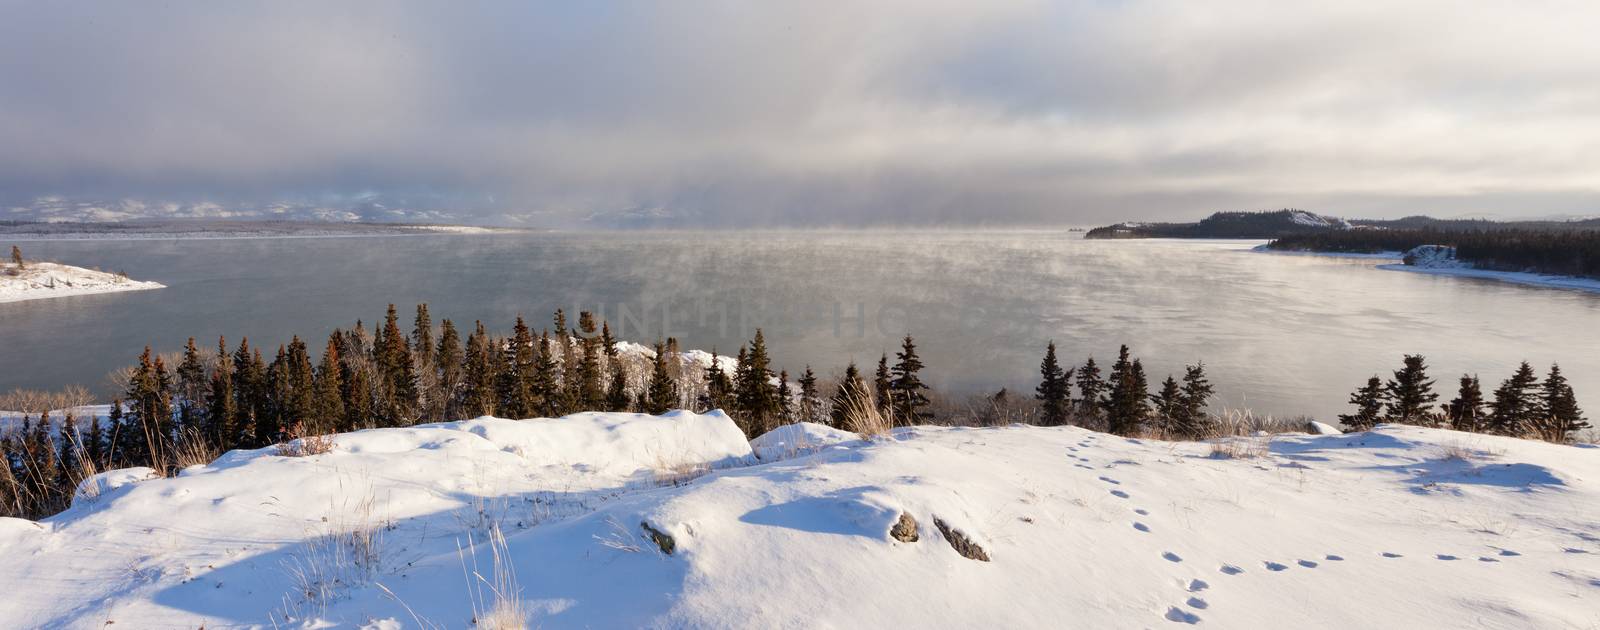 Steaming Lake Laberge, Yukon Territory, Canada, on cold winter day before freeze-up with fox tracks on snowy lake shore